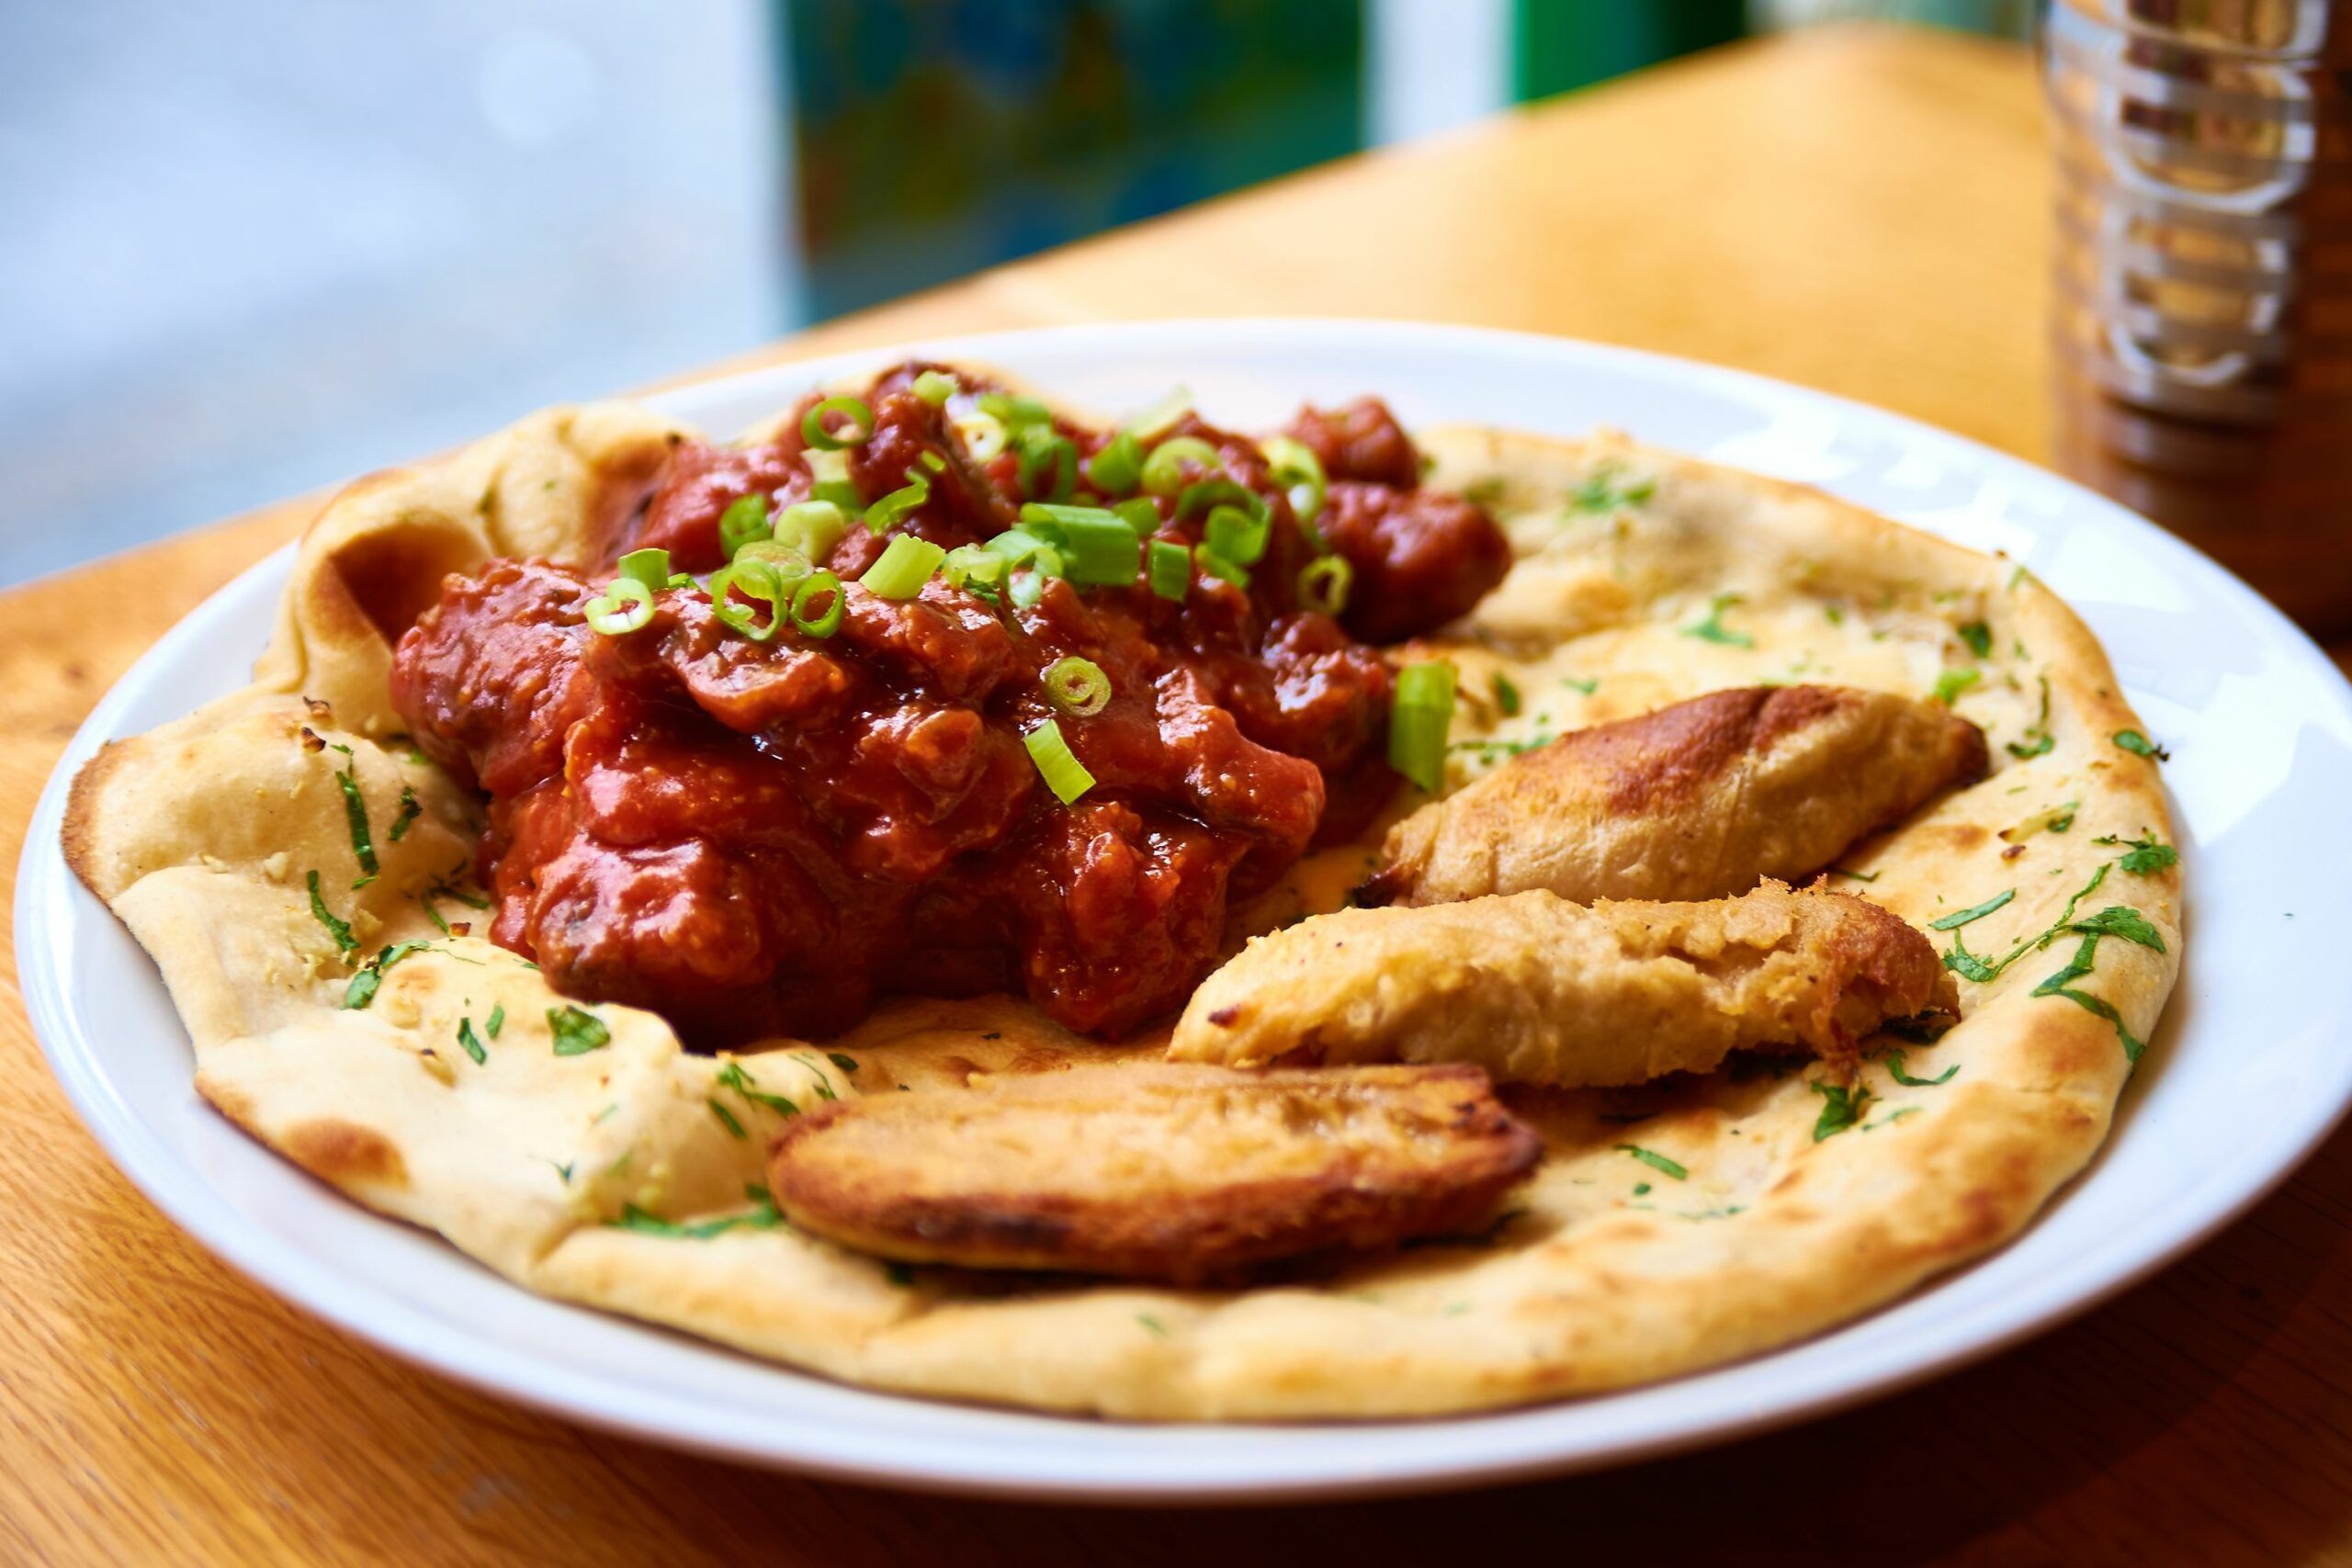 Mouthwatering new brunch menu at the Curry Leaf Cafe. Vegan Sausage and Mushroom Naan dish